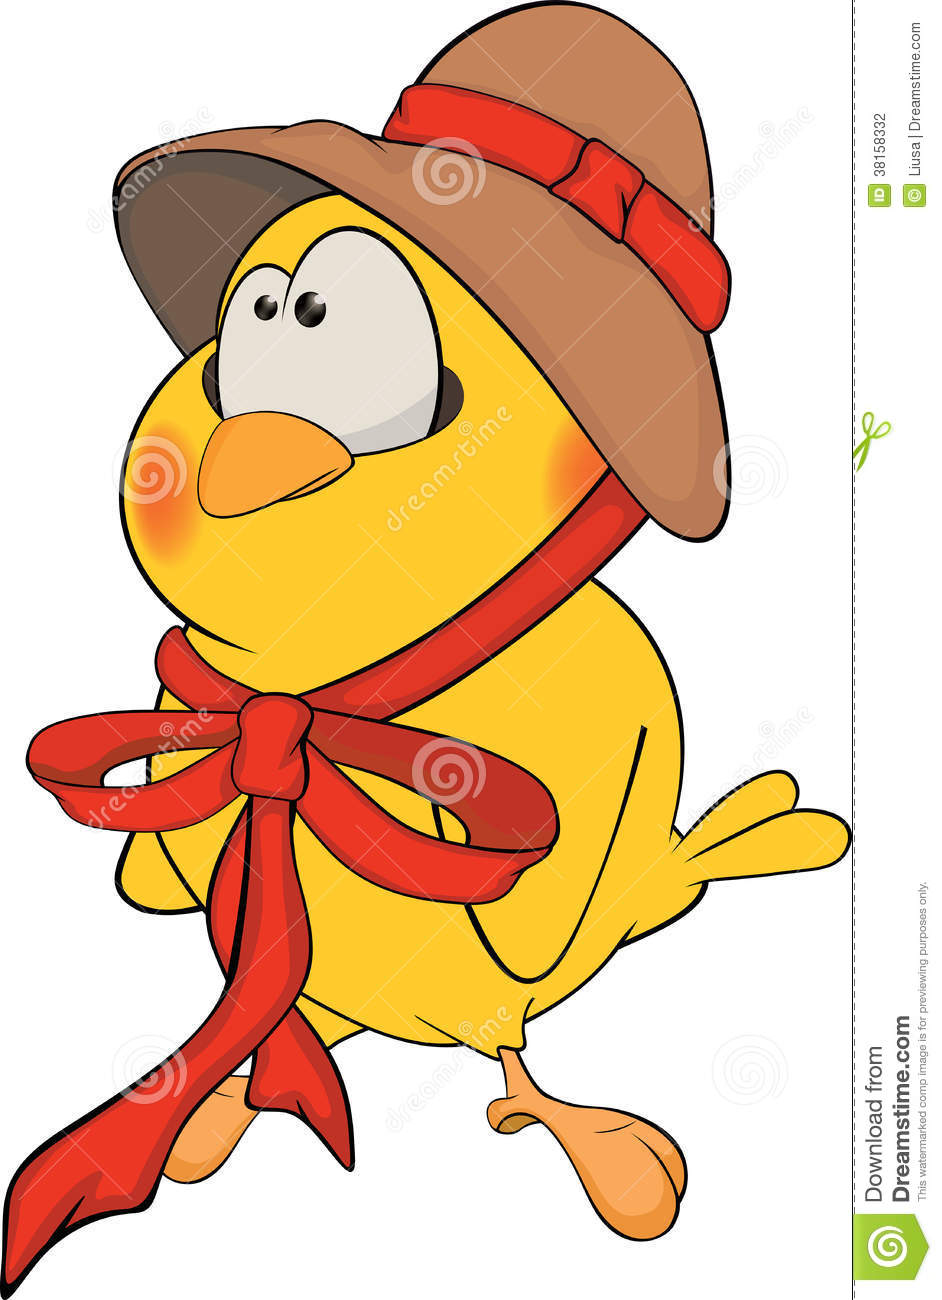 Chicken In A Hat Cartoon Stock Photography   Image  38158332